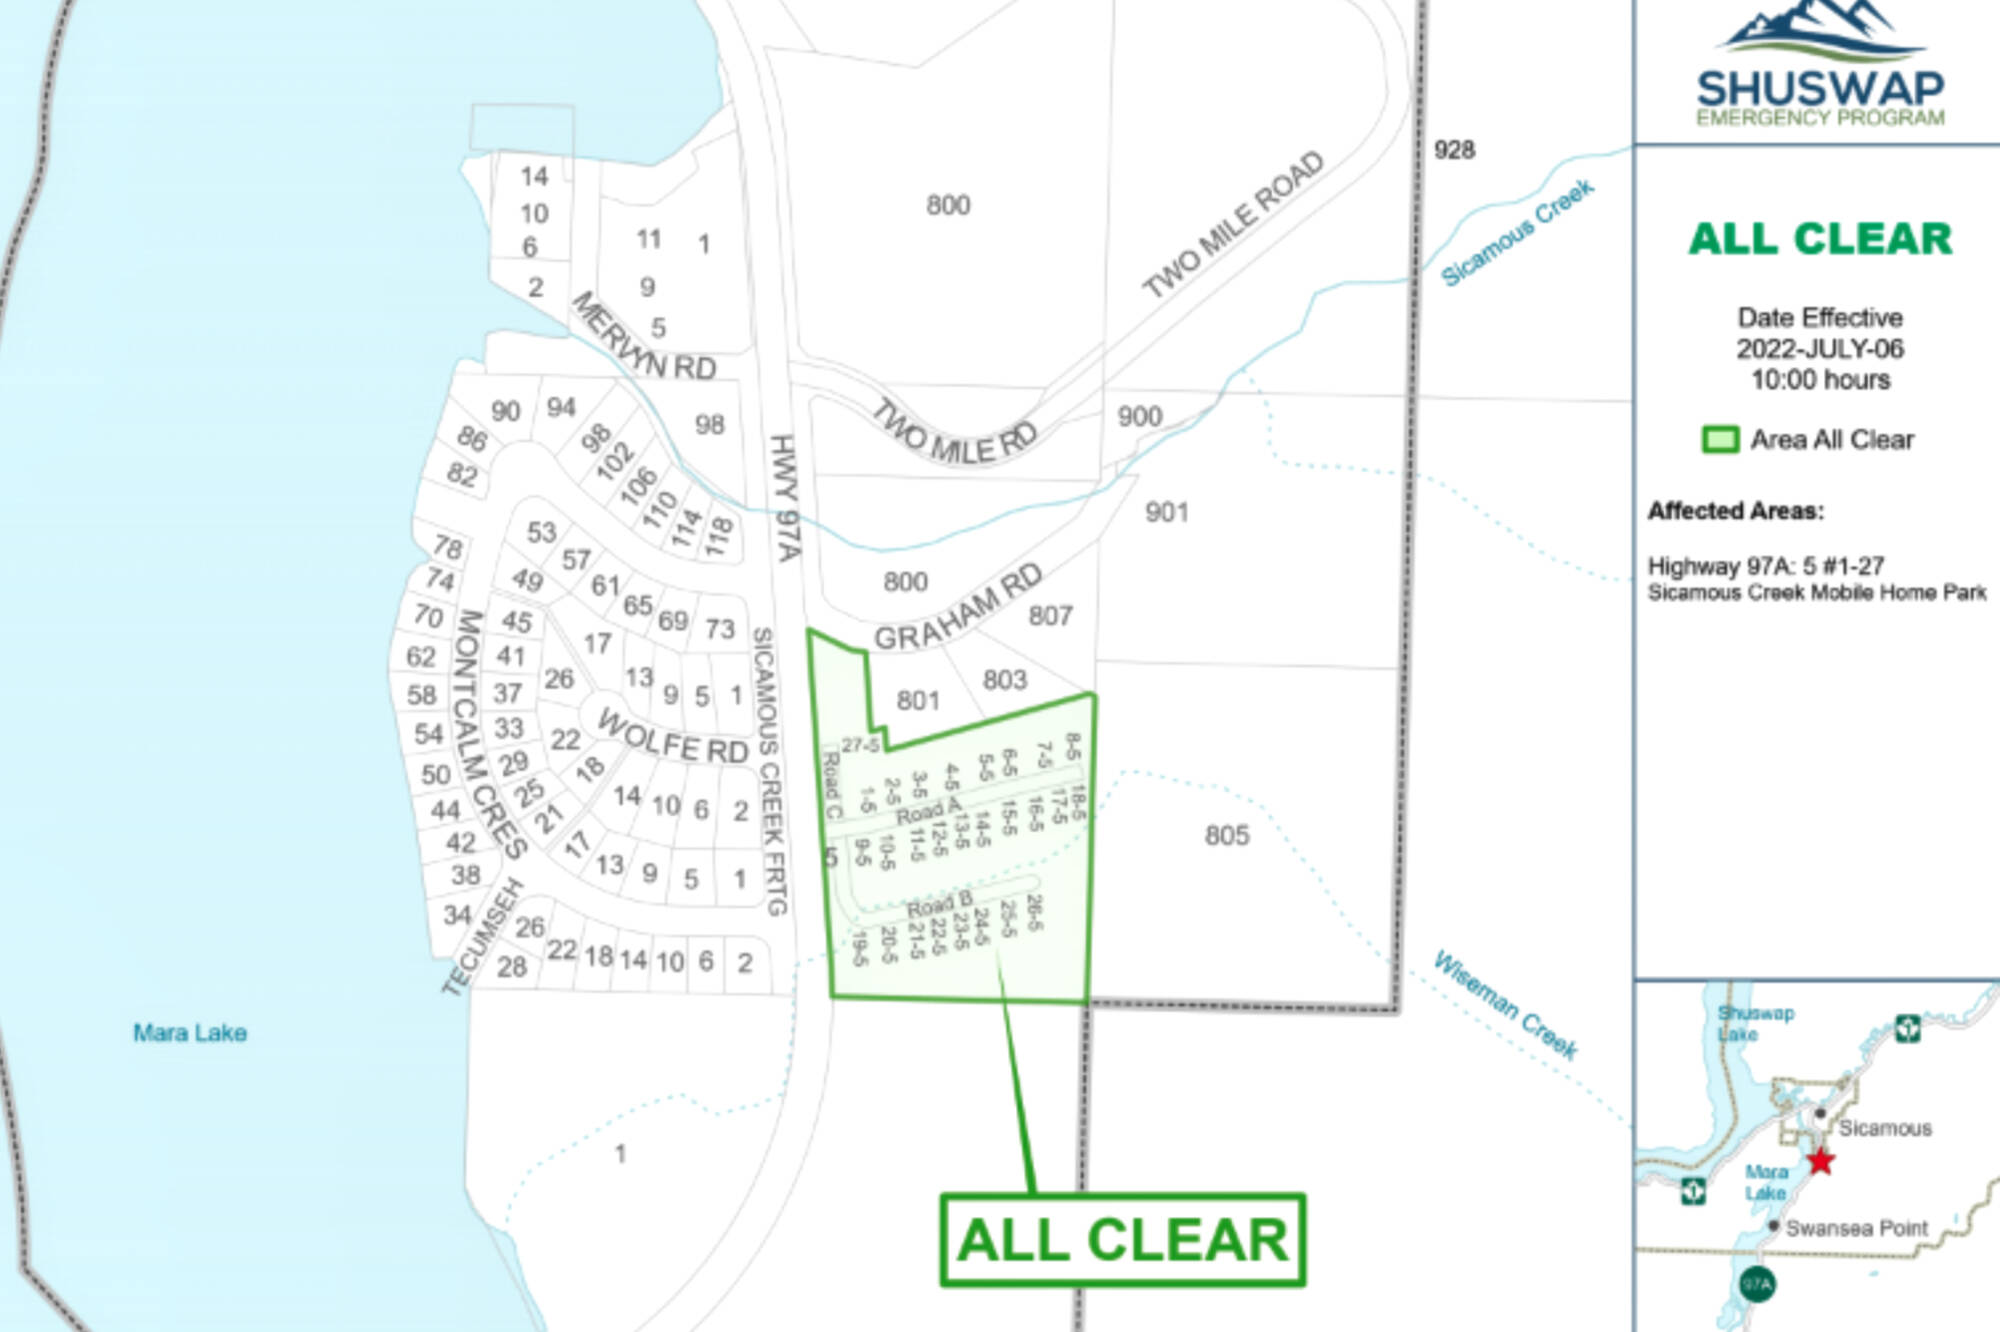 An evacuation alert issued for residences in the Sicamous Creek Mobile Home Park on July 3 was lifted on July 6. (CSRD image)